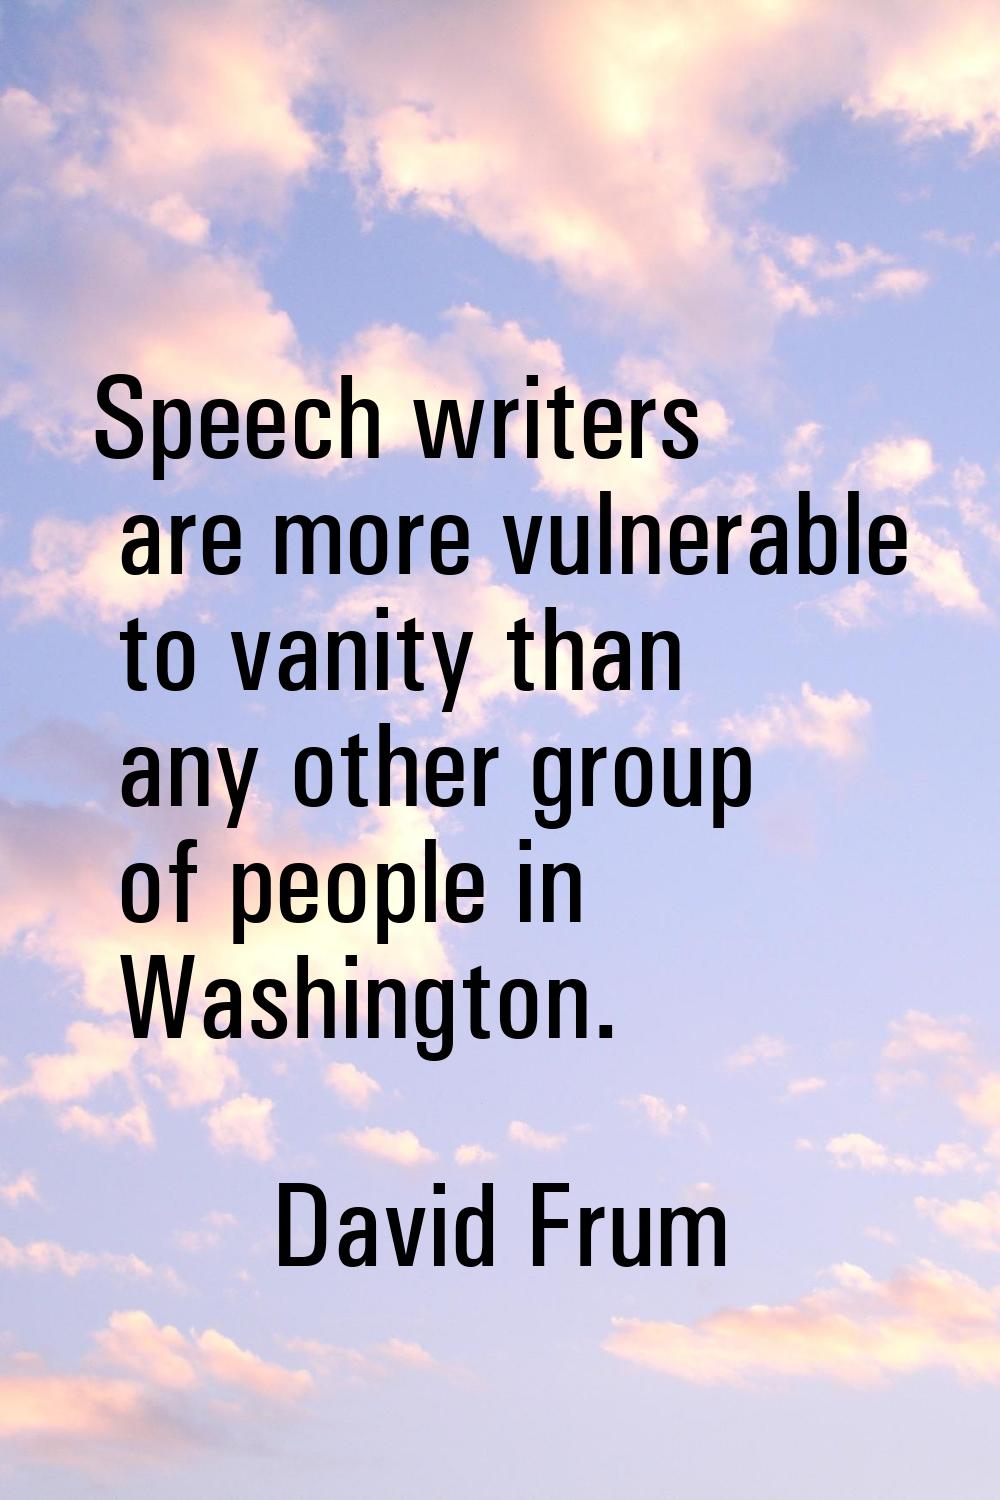 Speech writers are more vulnerable to vanity than any other group of people in Washington.